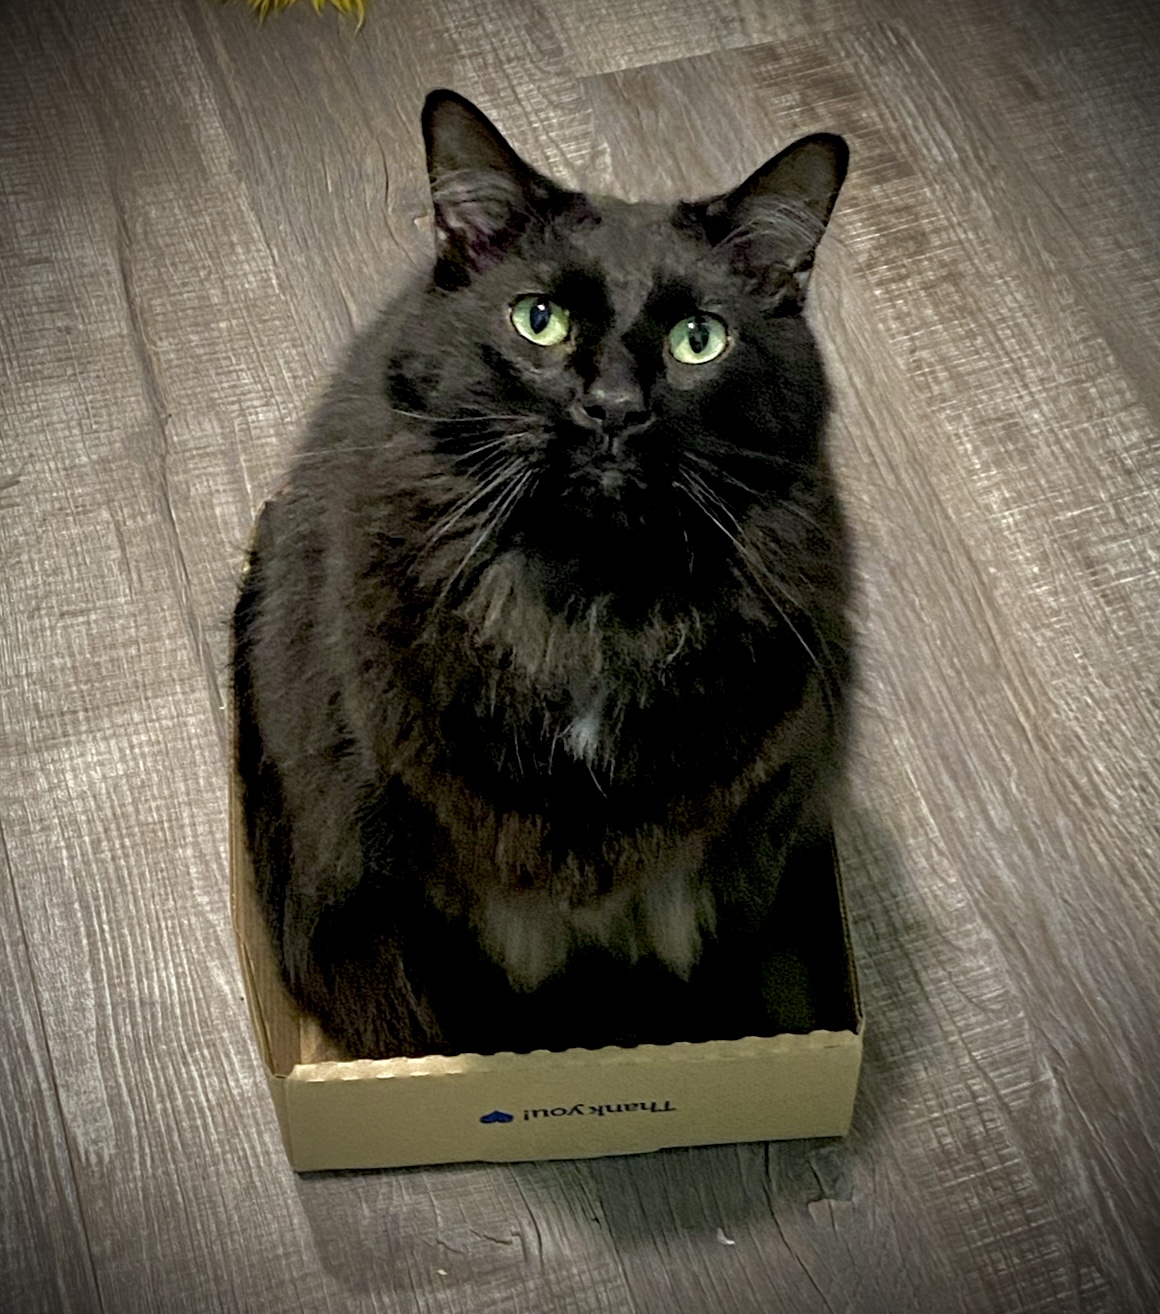 A long-haired black cat with green eyes sits in a short box, looking at the camera